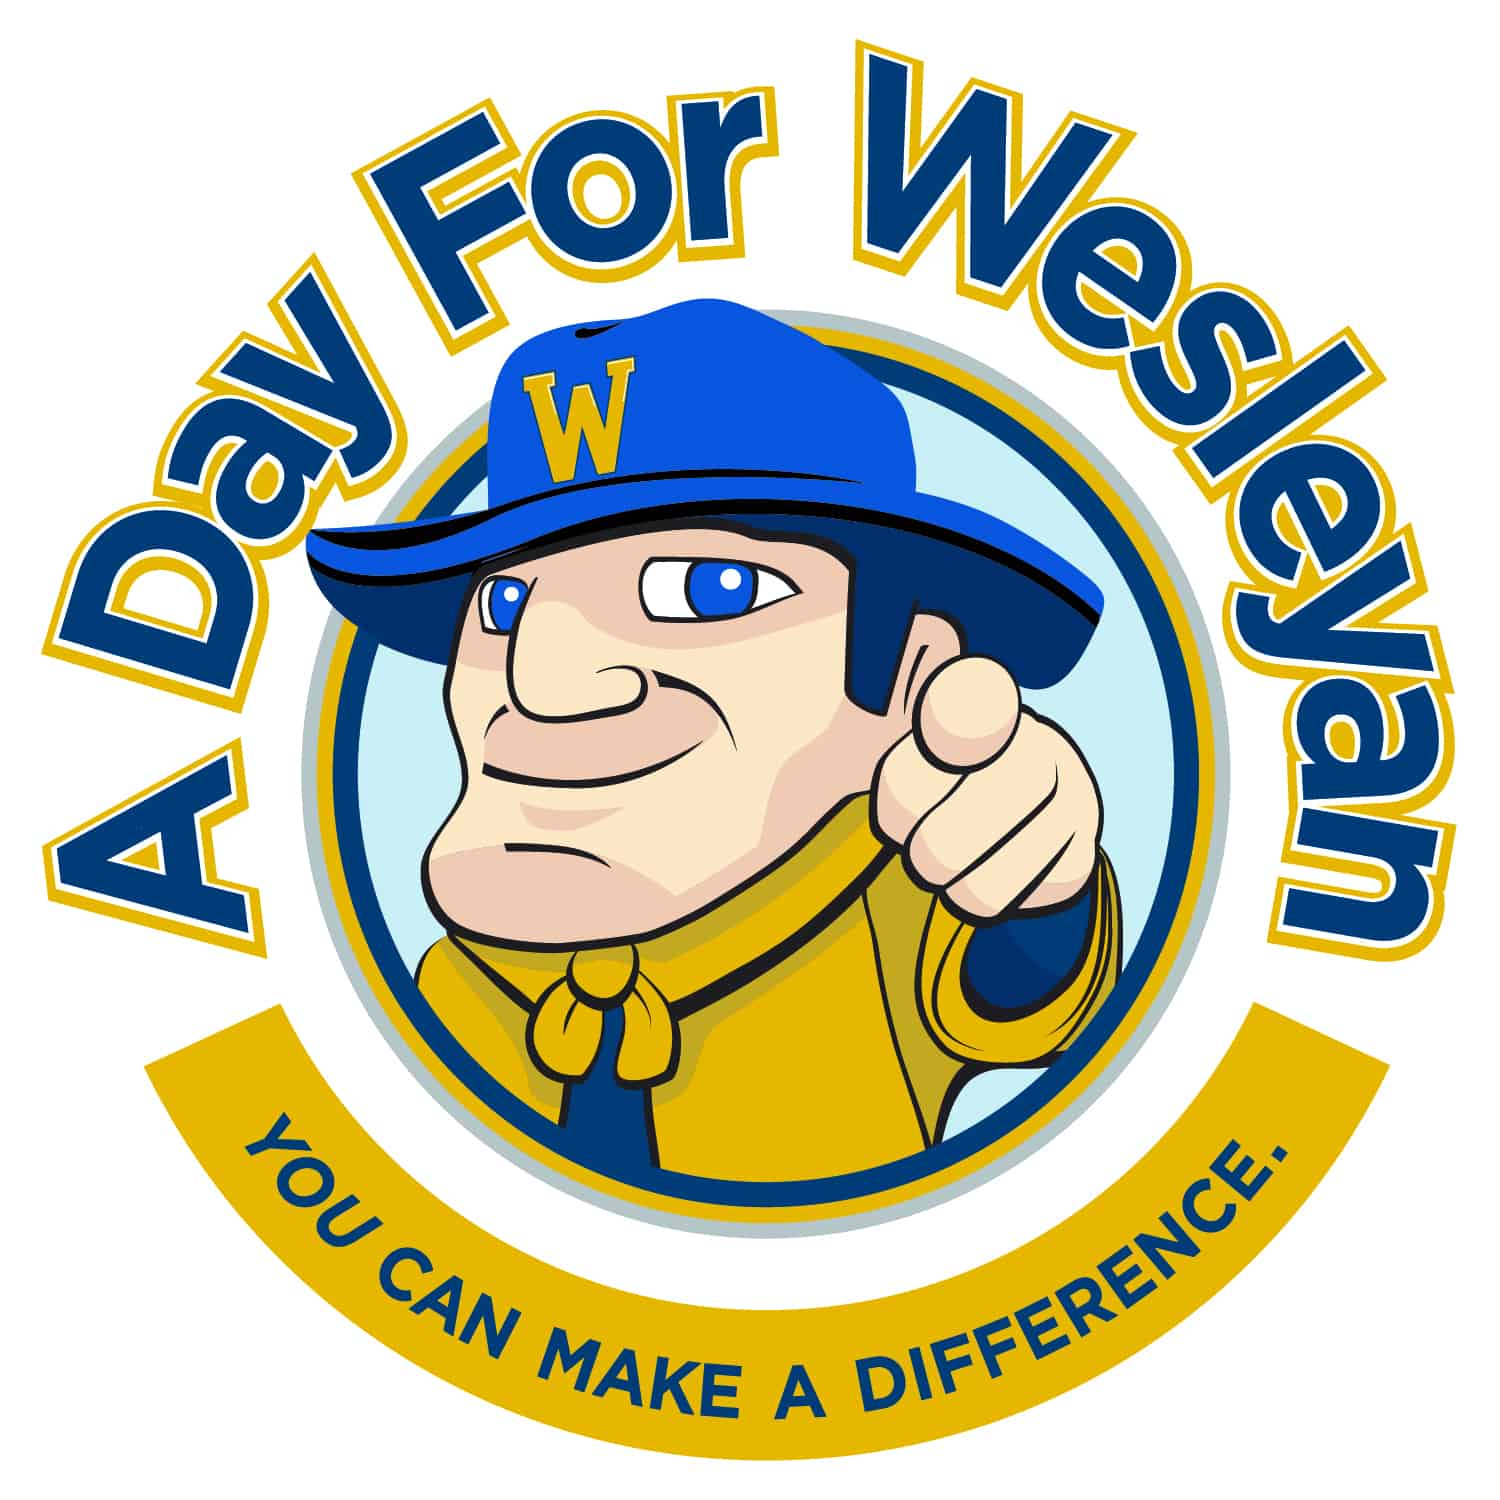 A day for Wesleyan "You can make a difference" logo